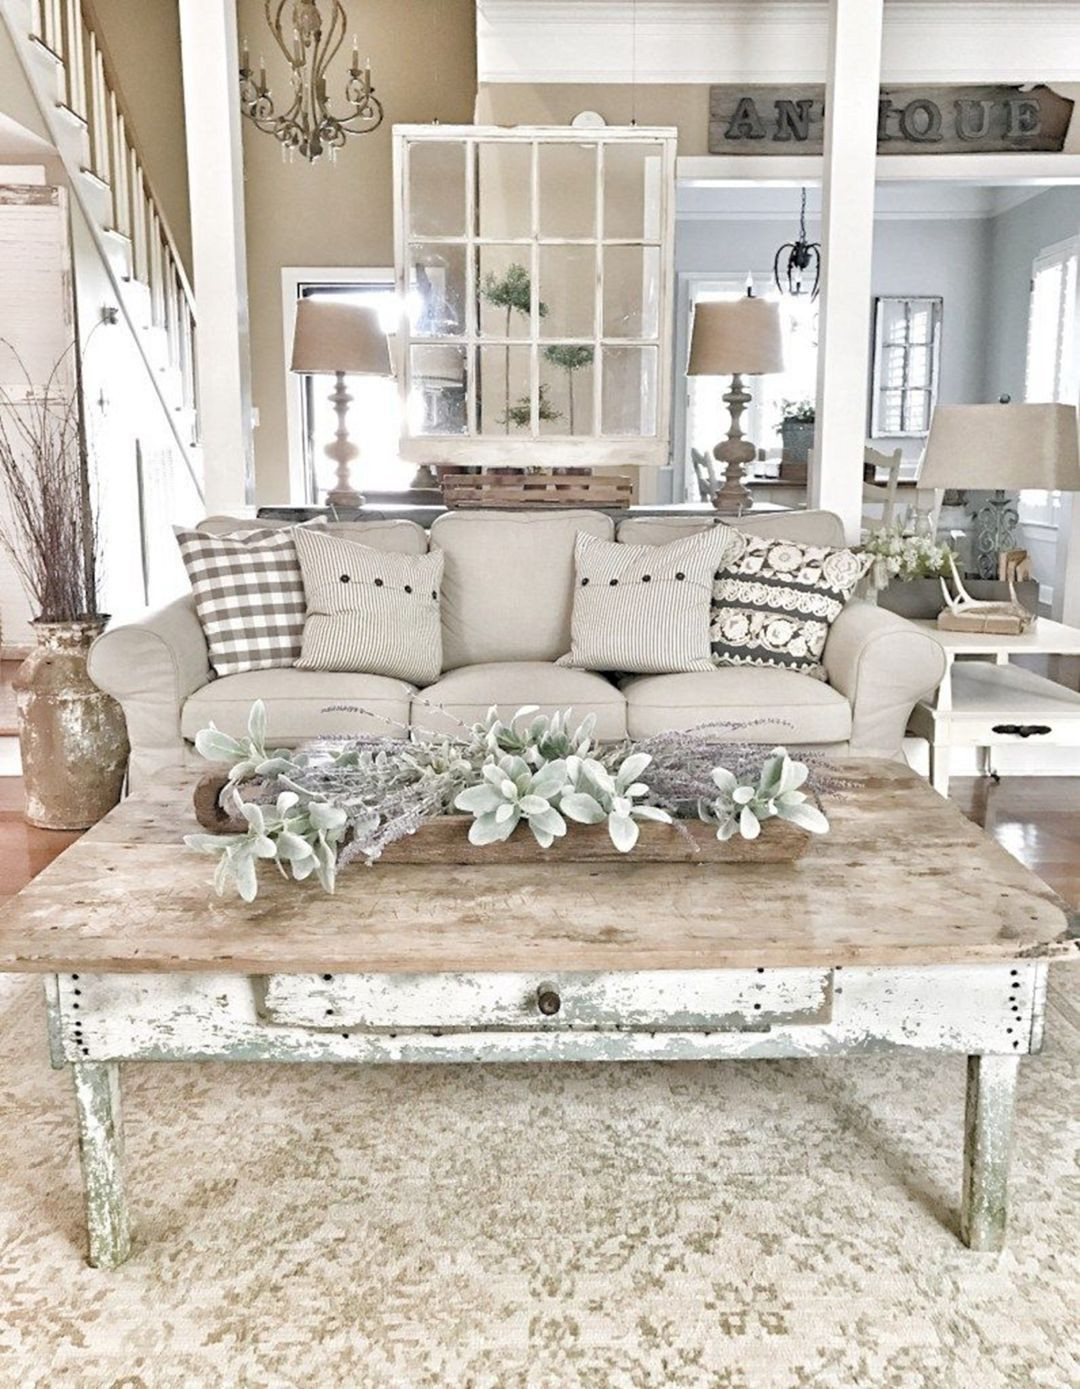 Rustic Shabby Chic Living Room
 Home Decor White in 2020